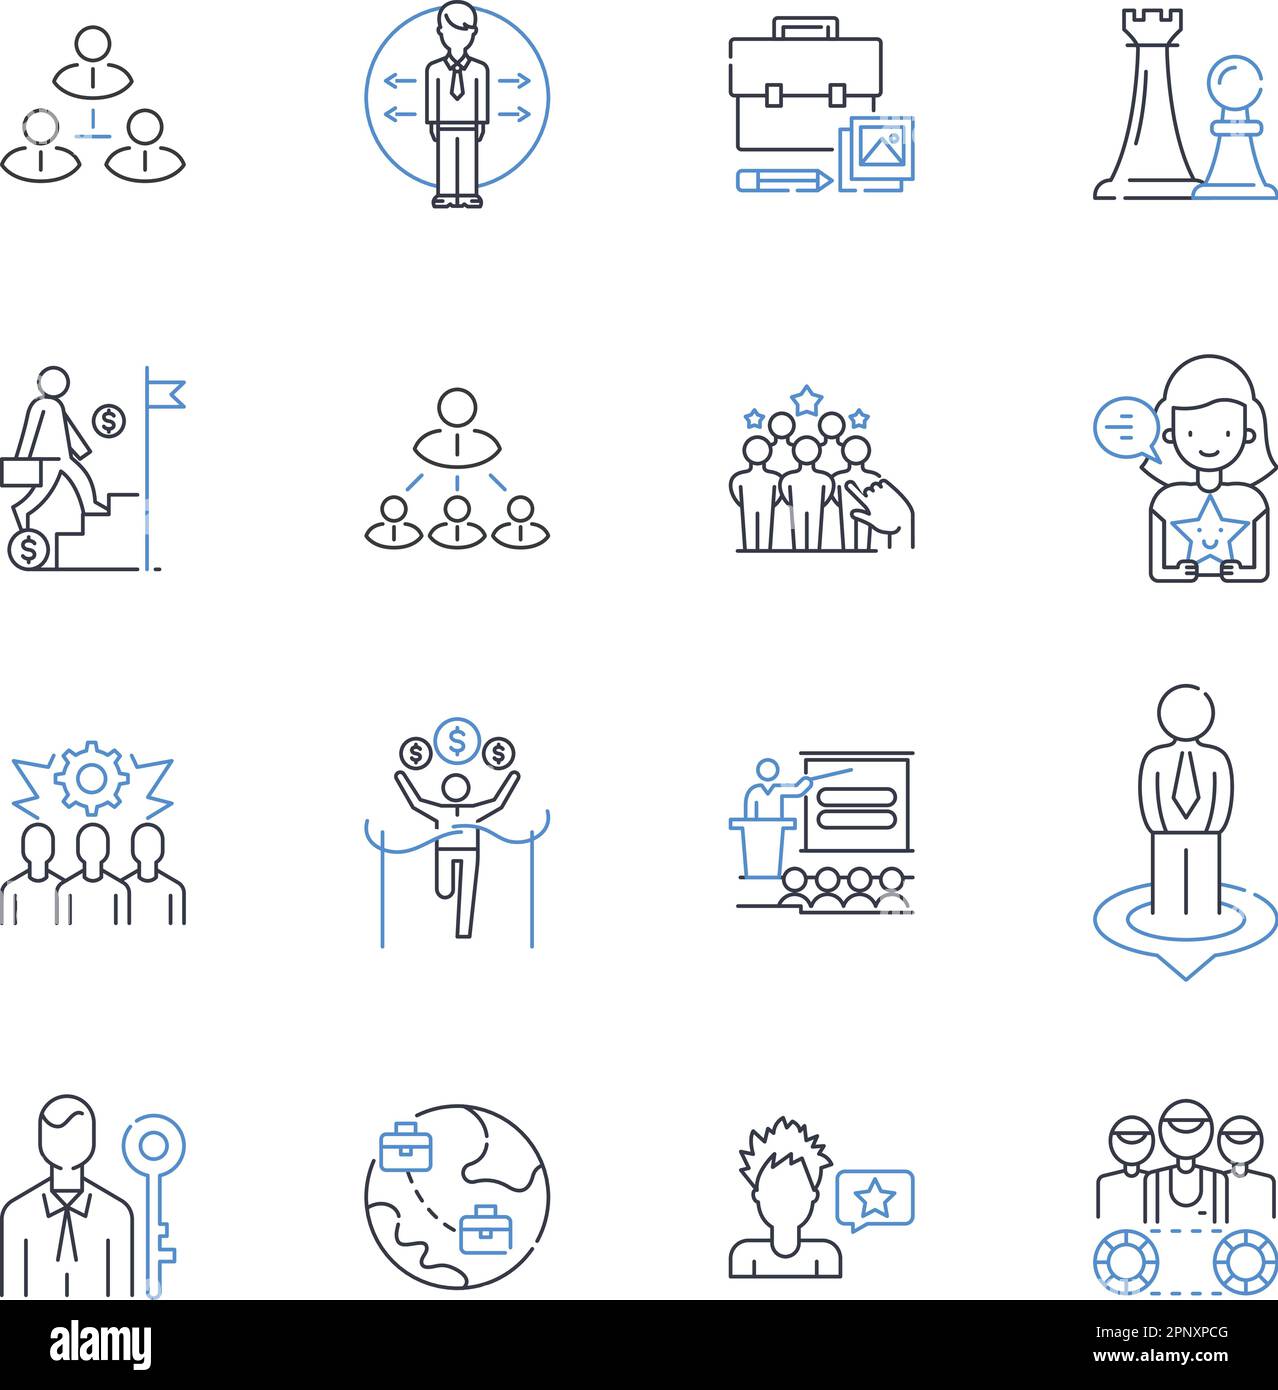 Industrial relations line icons collection. Collective bargaining, Dispute resolution, Grievance, Unionization, Industrial action, Conciliation Stock Vector